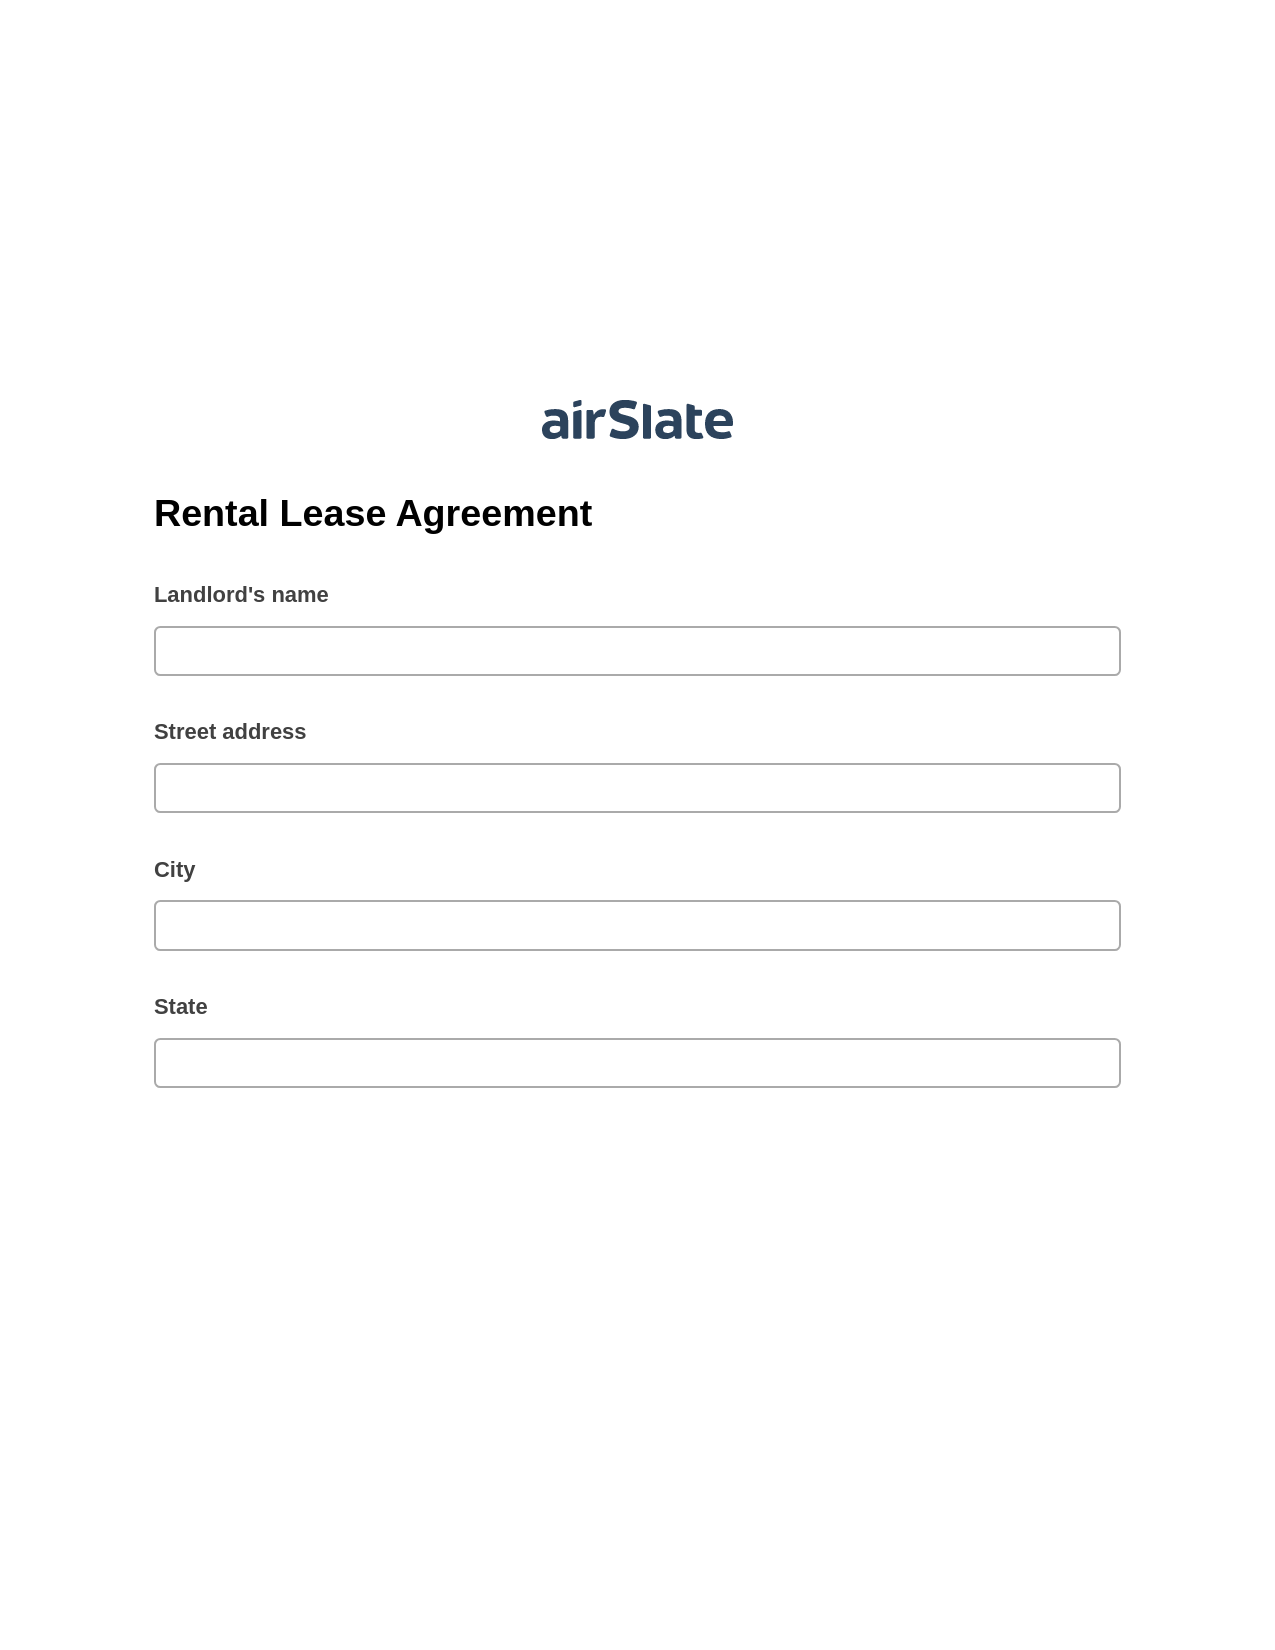 Rental Lease Agreement Pre-fill from MySQL Bot, Update MS Dynamics 365 Record Bot, Email Notification Postfinish Bot